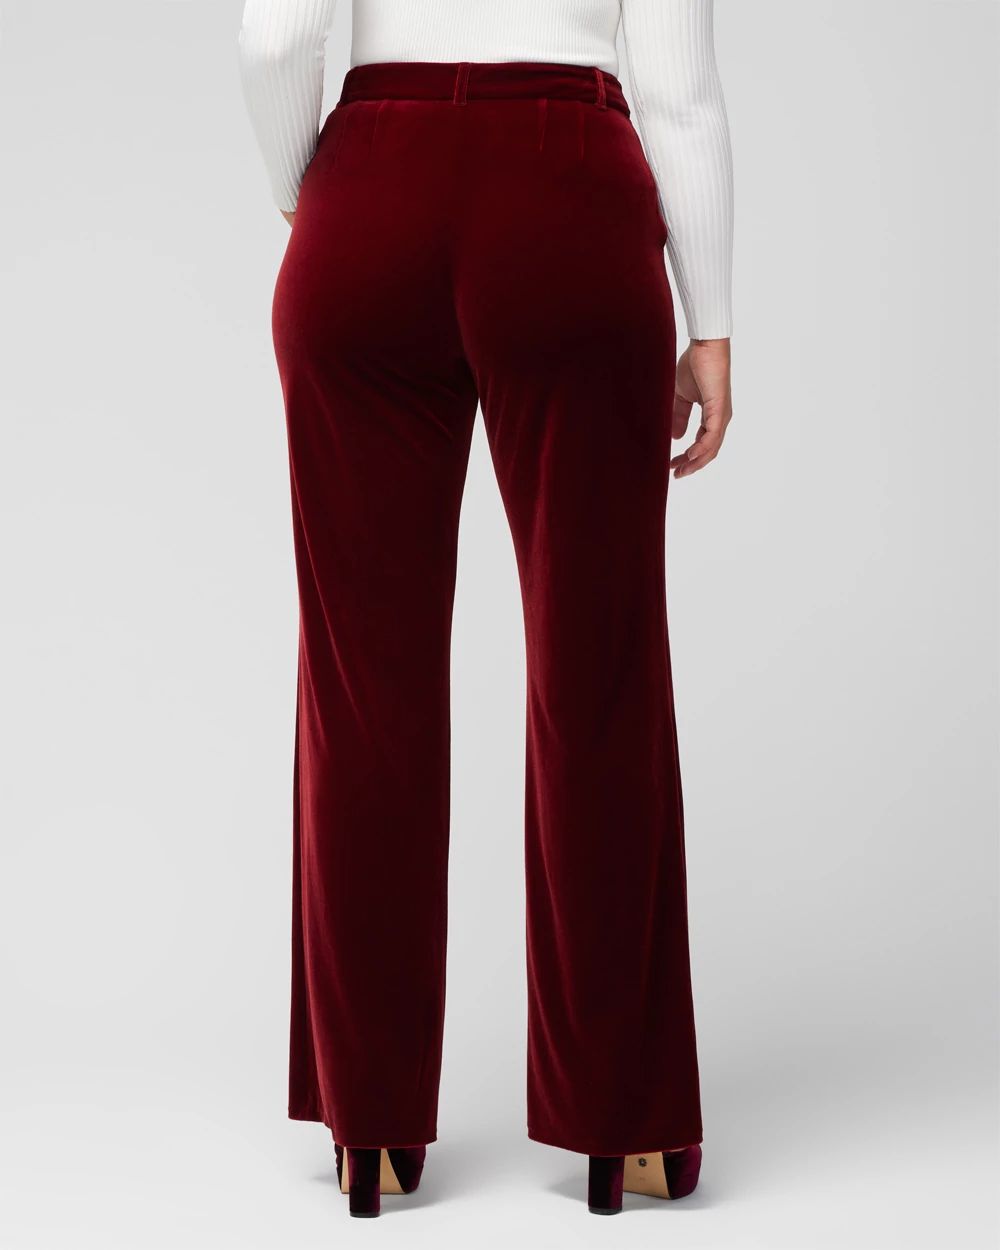 WHBM® Curvy Luna Wide Leg Velvet Trousers click to view larger image.